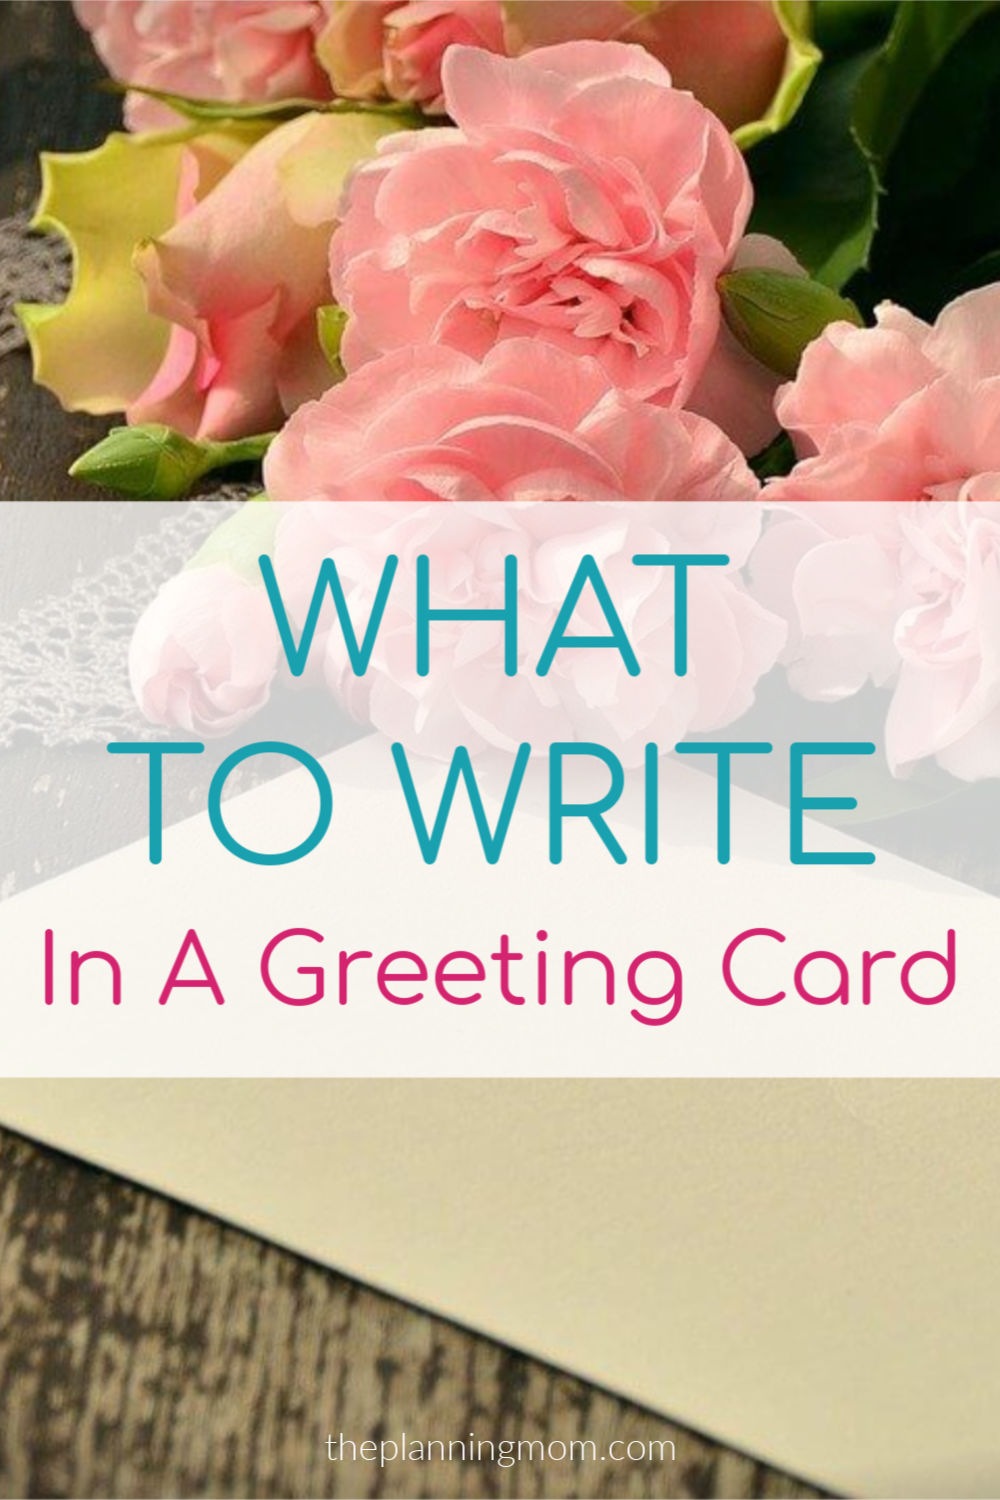 What to Write in a Greeting Card - The Planning Mom